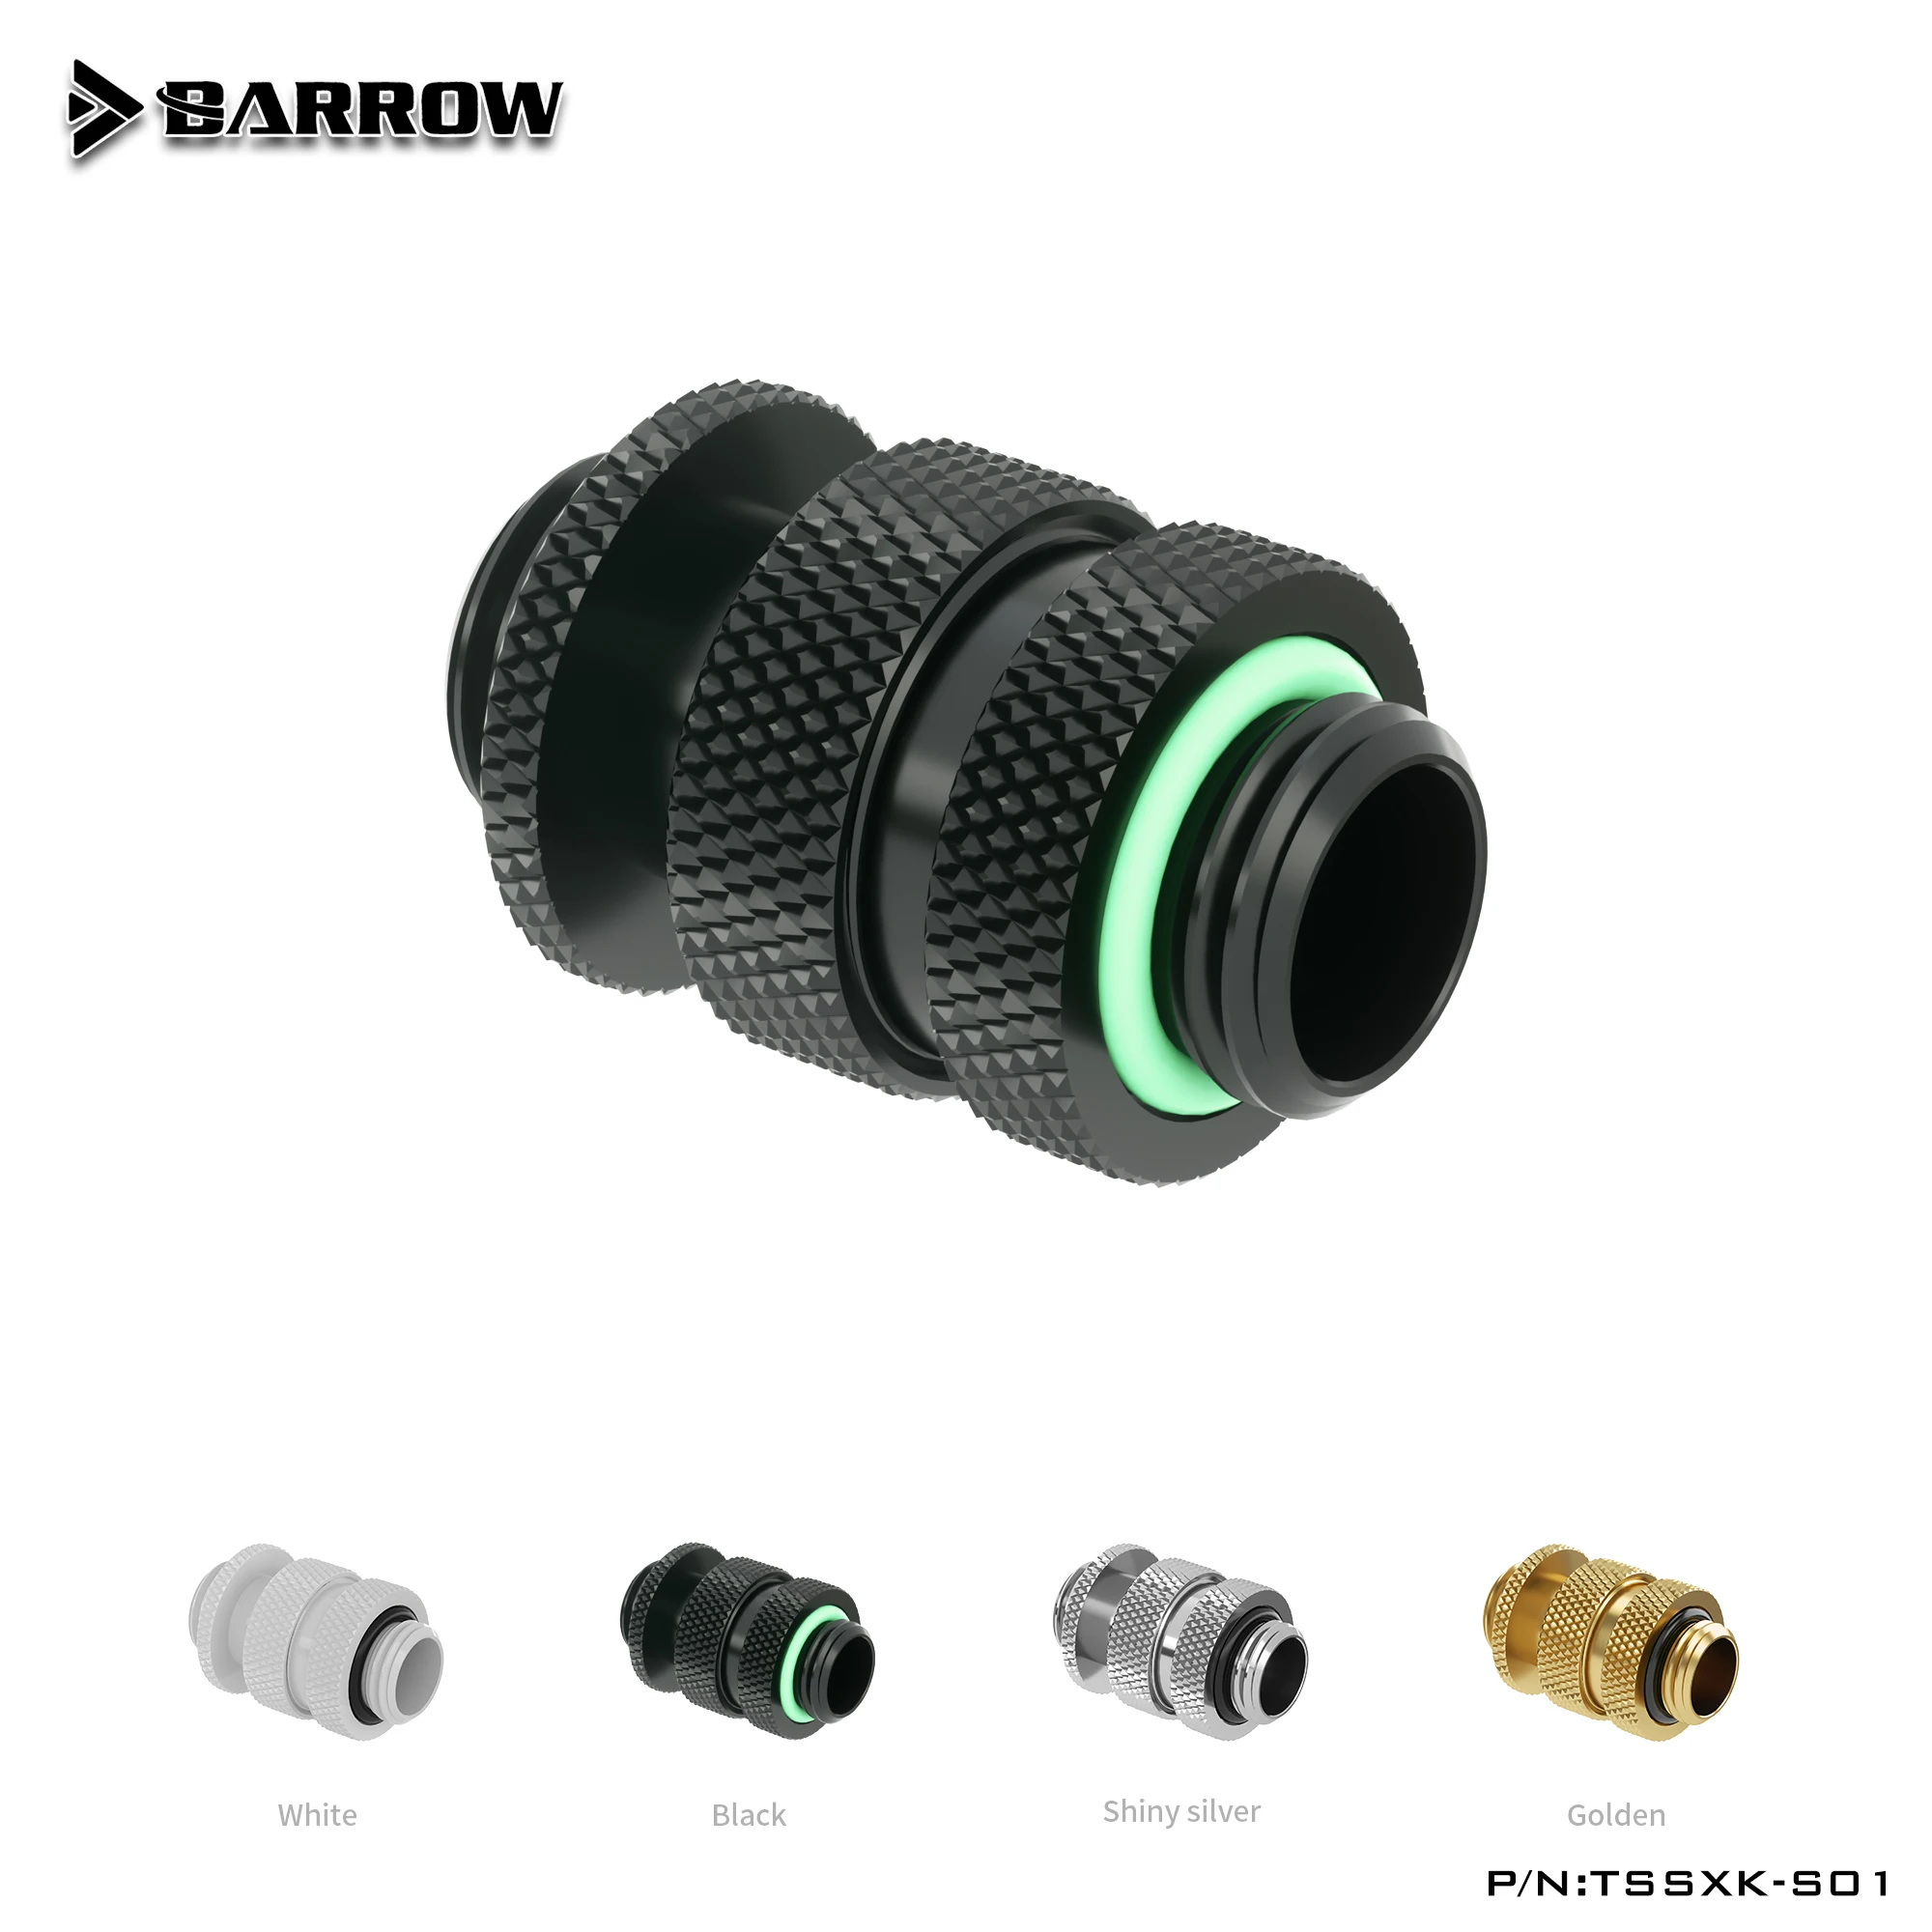 

Barrow PC water cooling G1/4" Male to Male Rotary Connectors Extender (16-22mm) modding pc TSSXK-S01